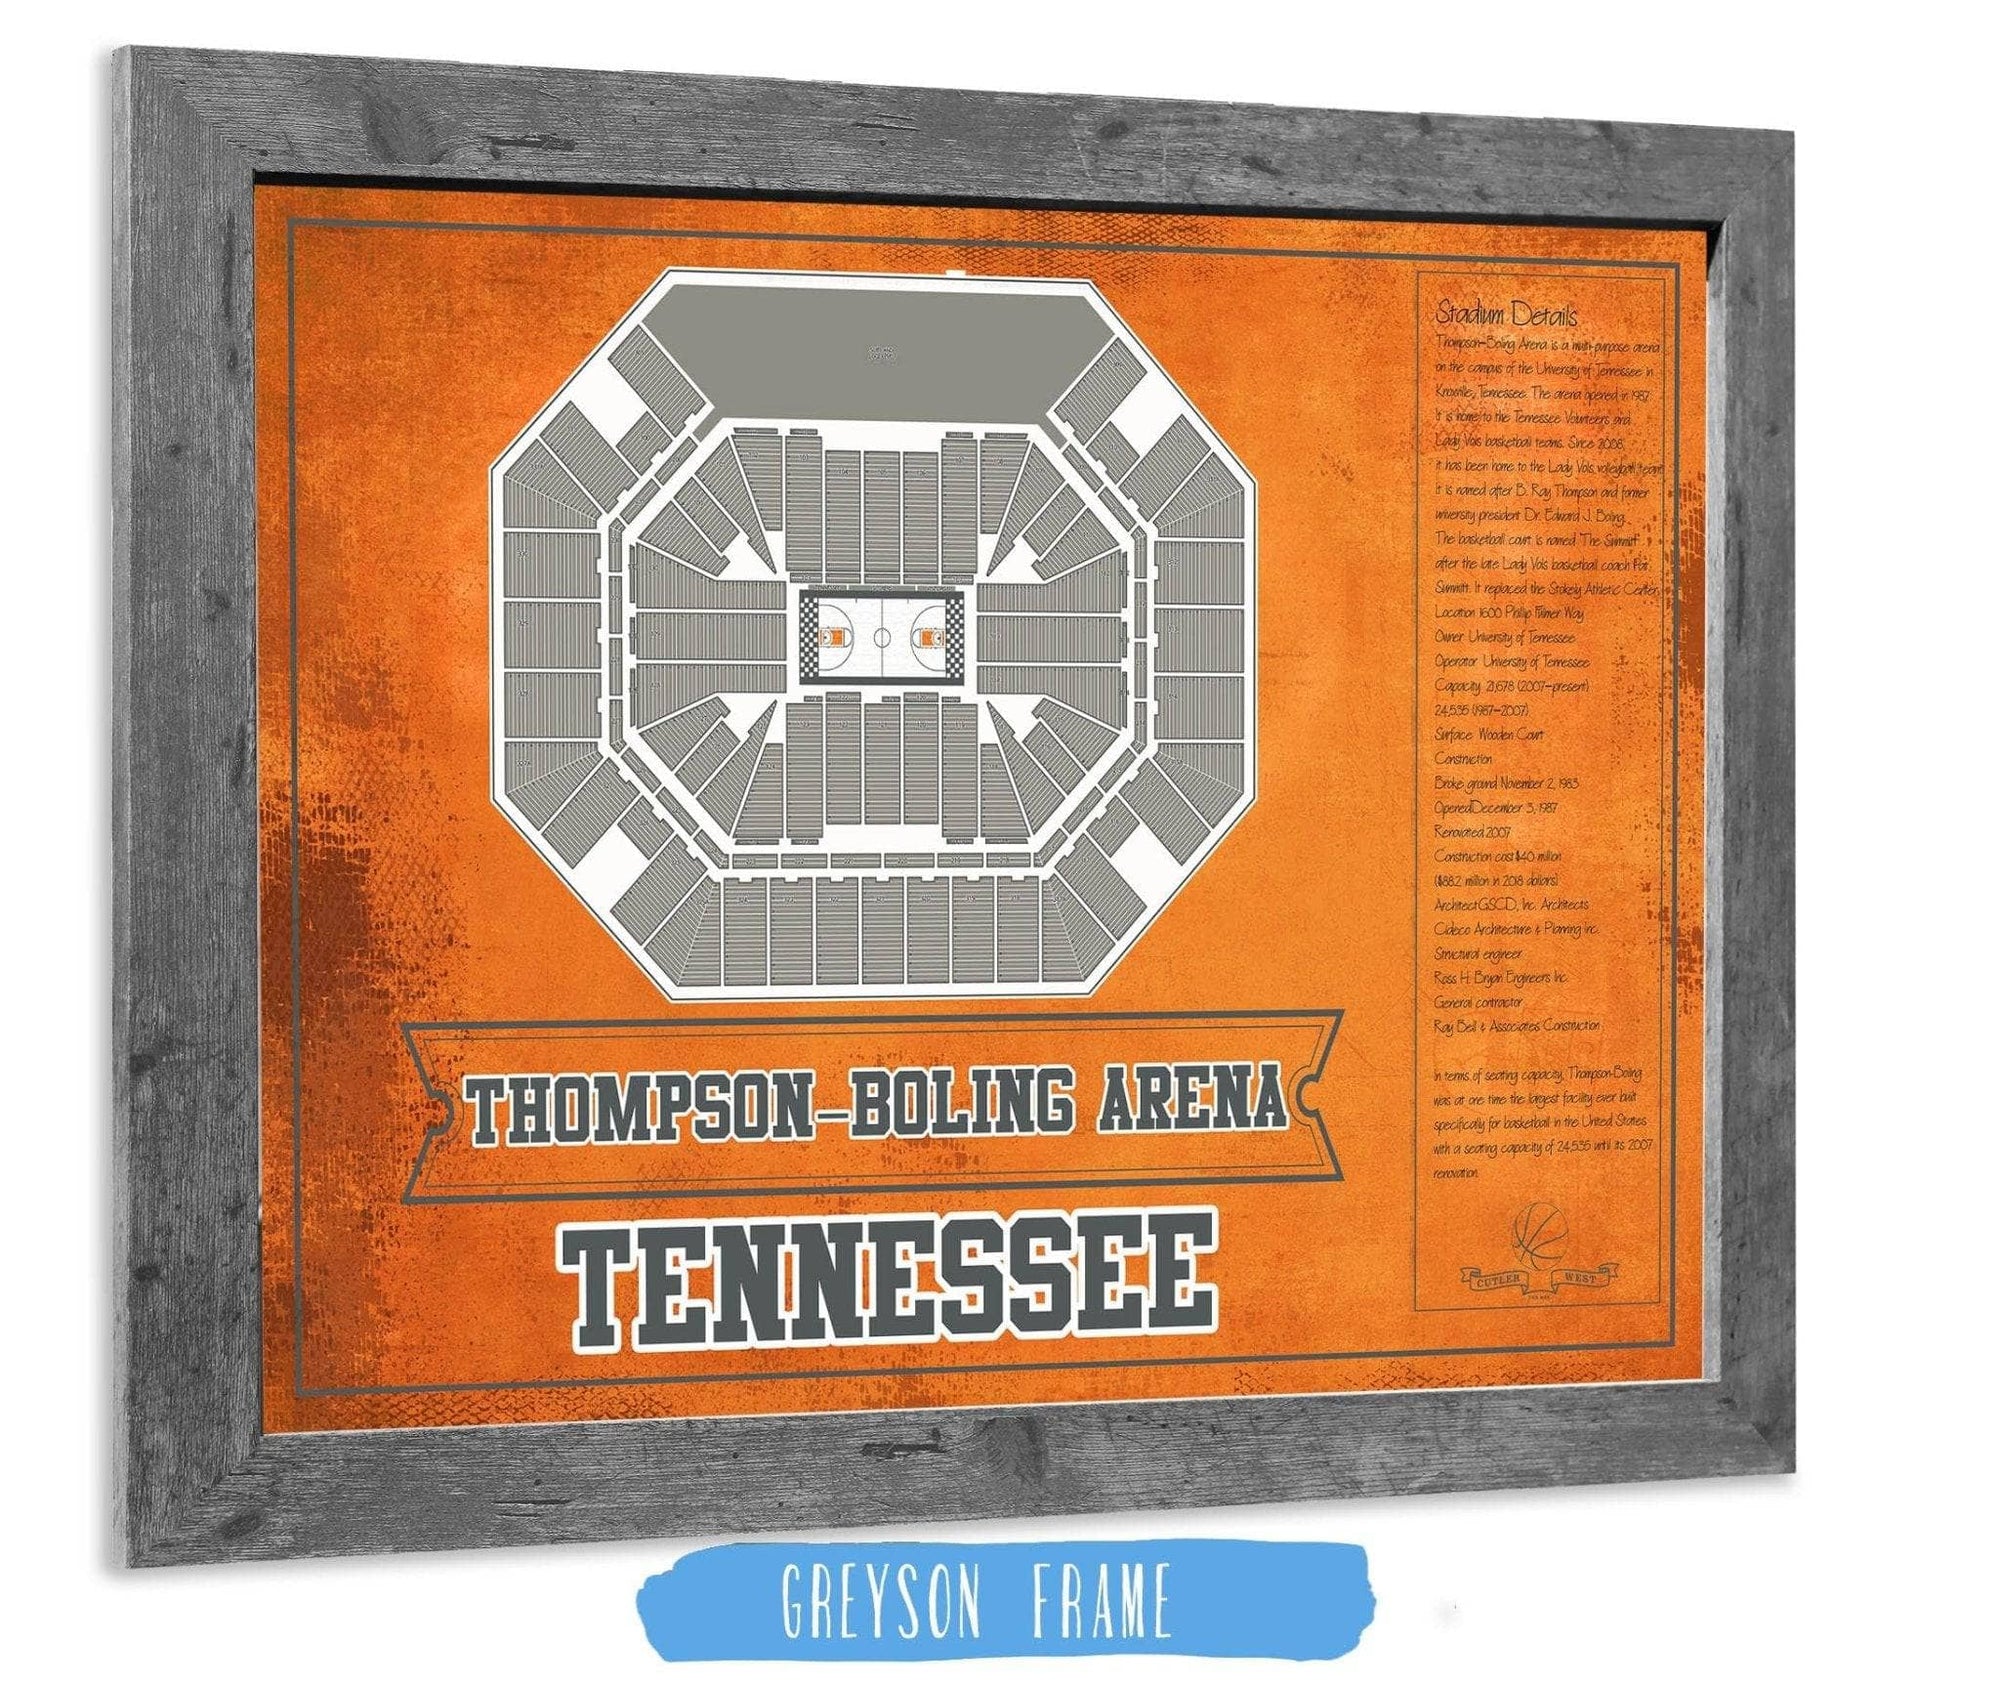 Cutler West Basketball Collection 14" x 11" / Greyson Frame Thompson–Boling Arena - Tennessee Volunteers, Lady Vols NCAA College Basketball Blueprint Art 93335021484753